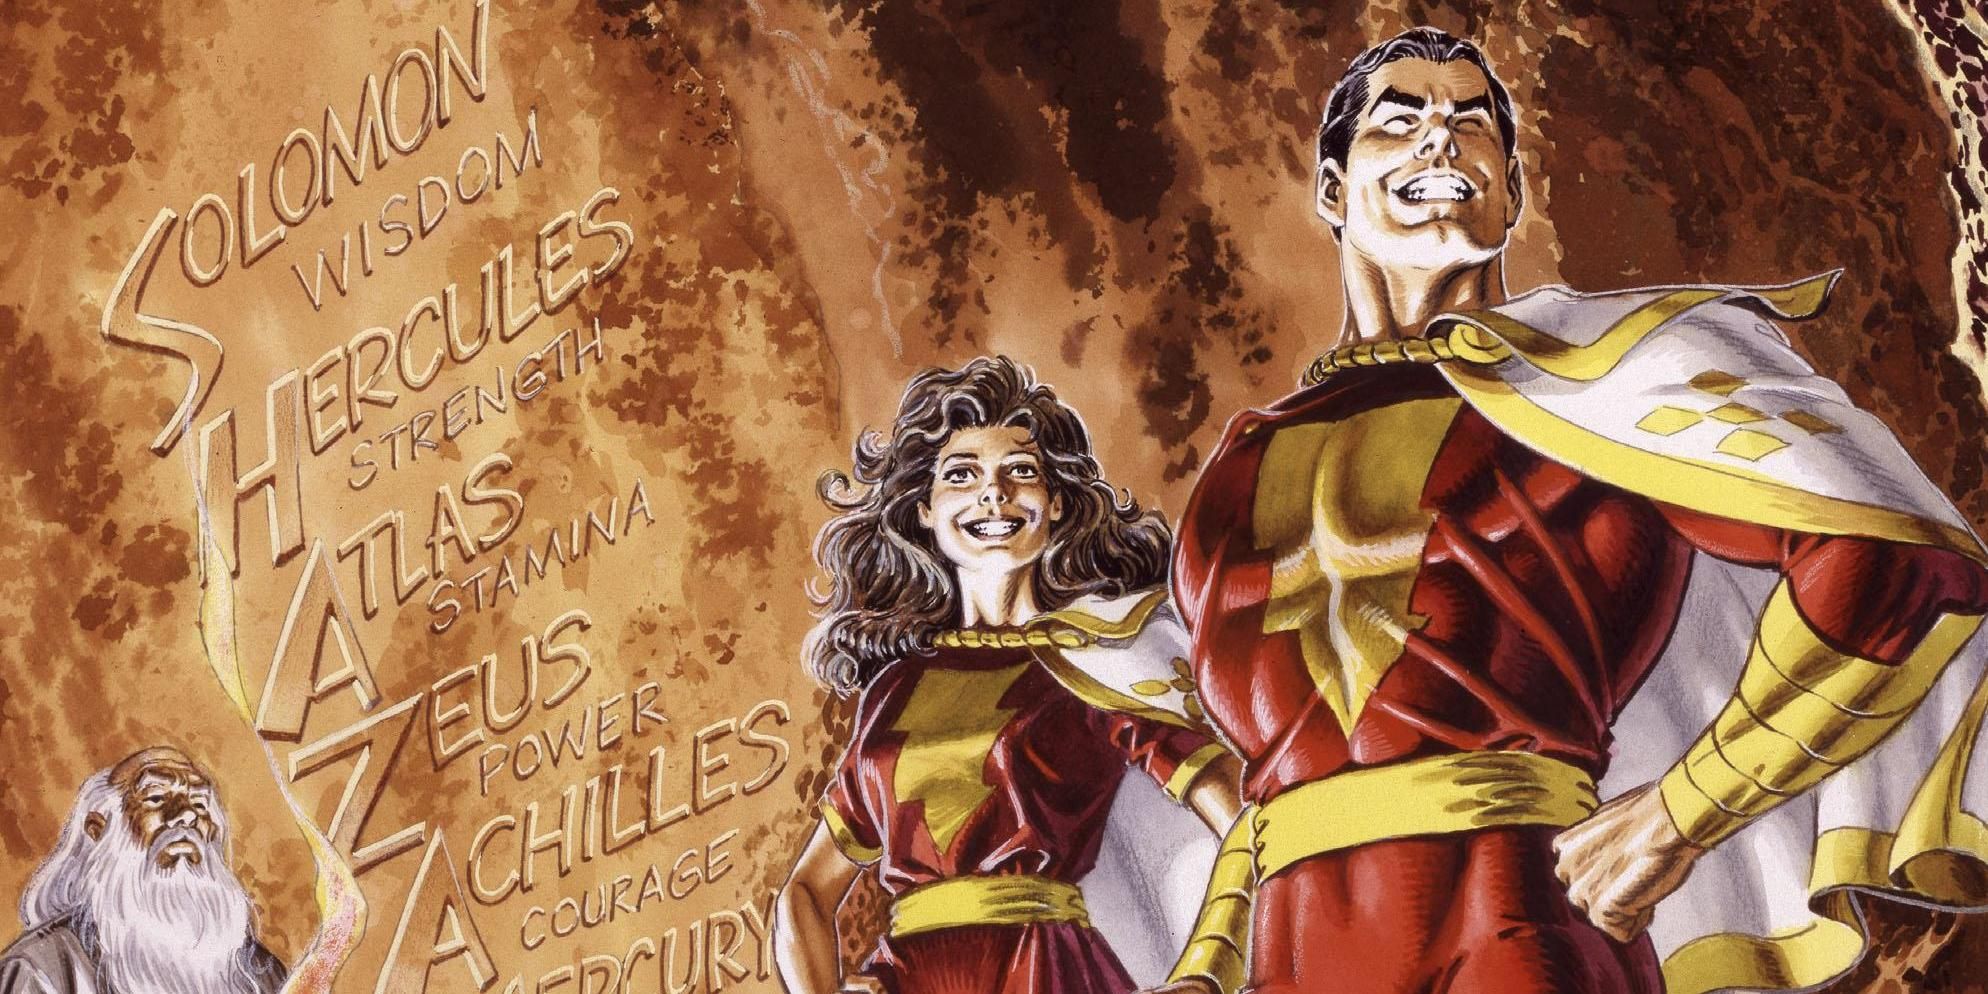 Captain Marvel, Mary Marvel, and the Wizard on Powe of Shazam cover